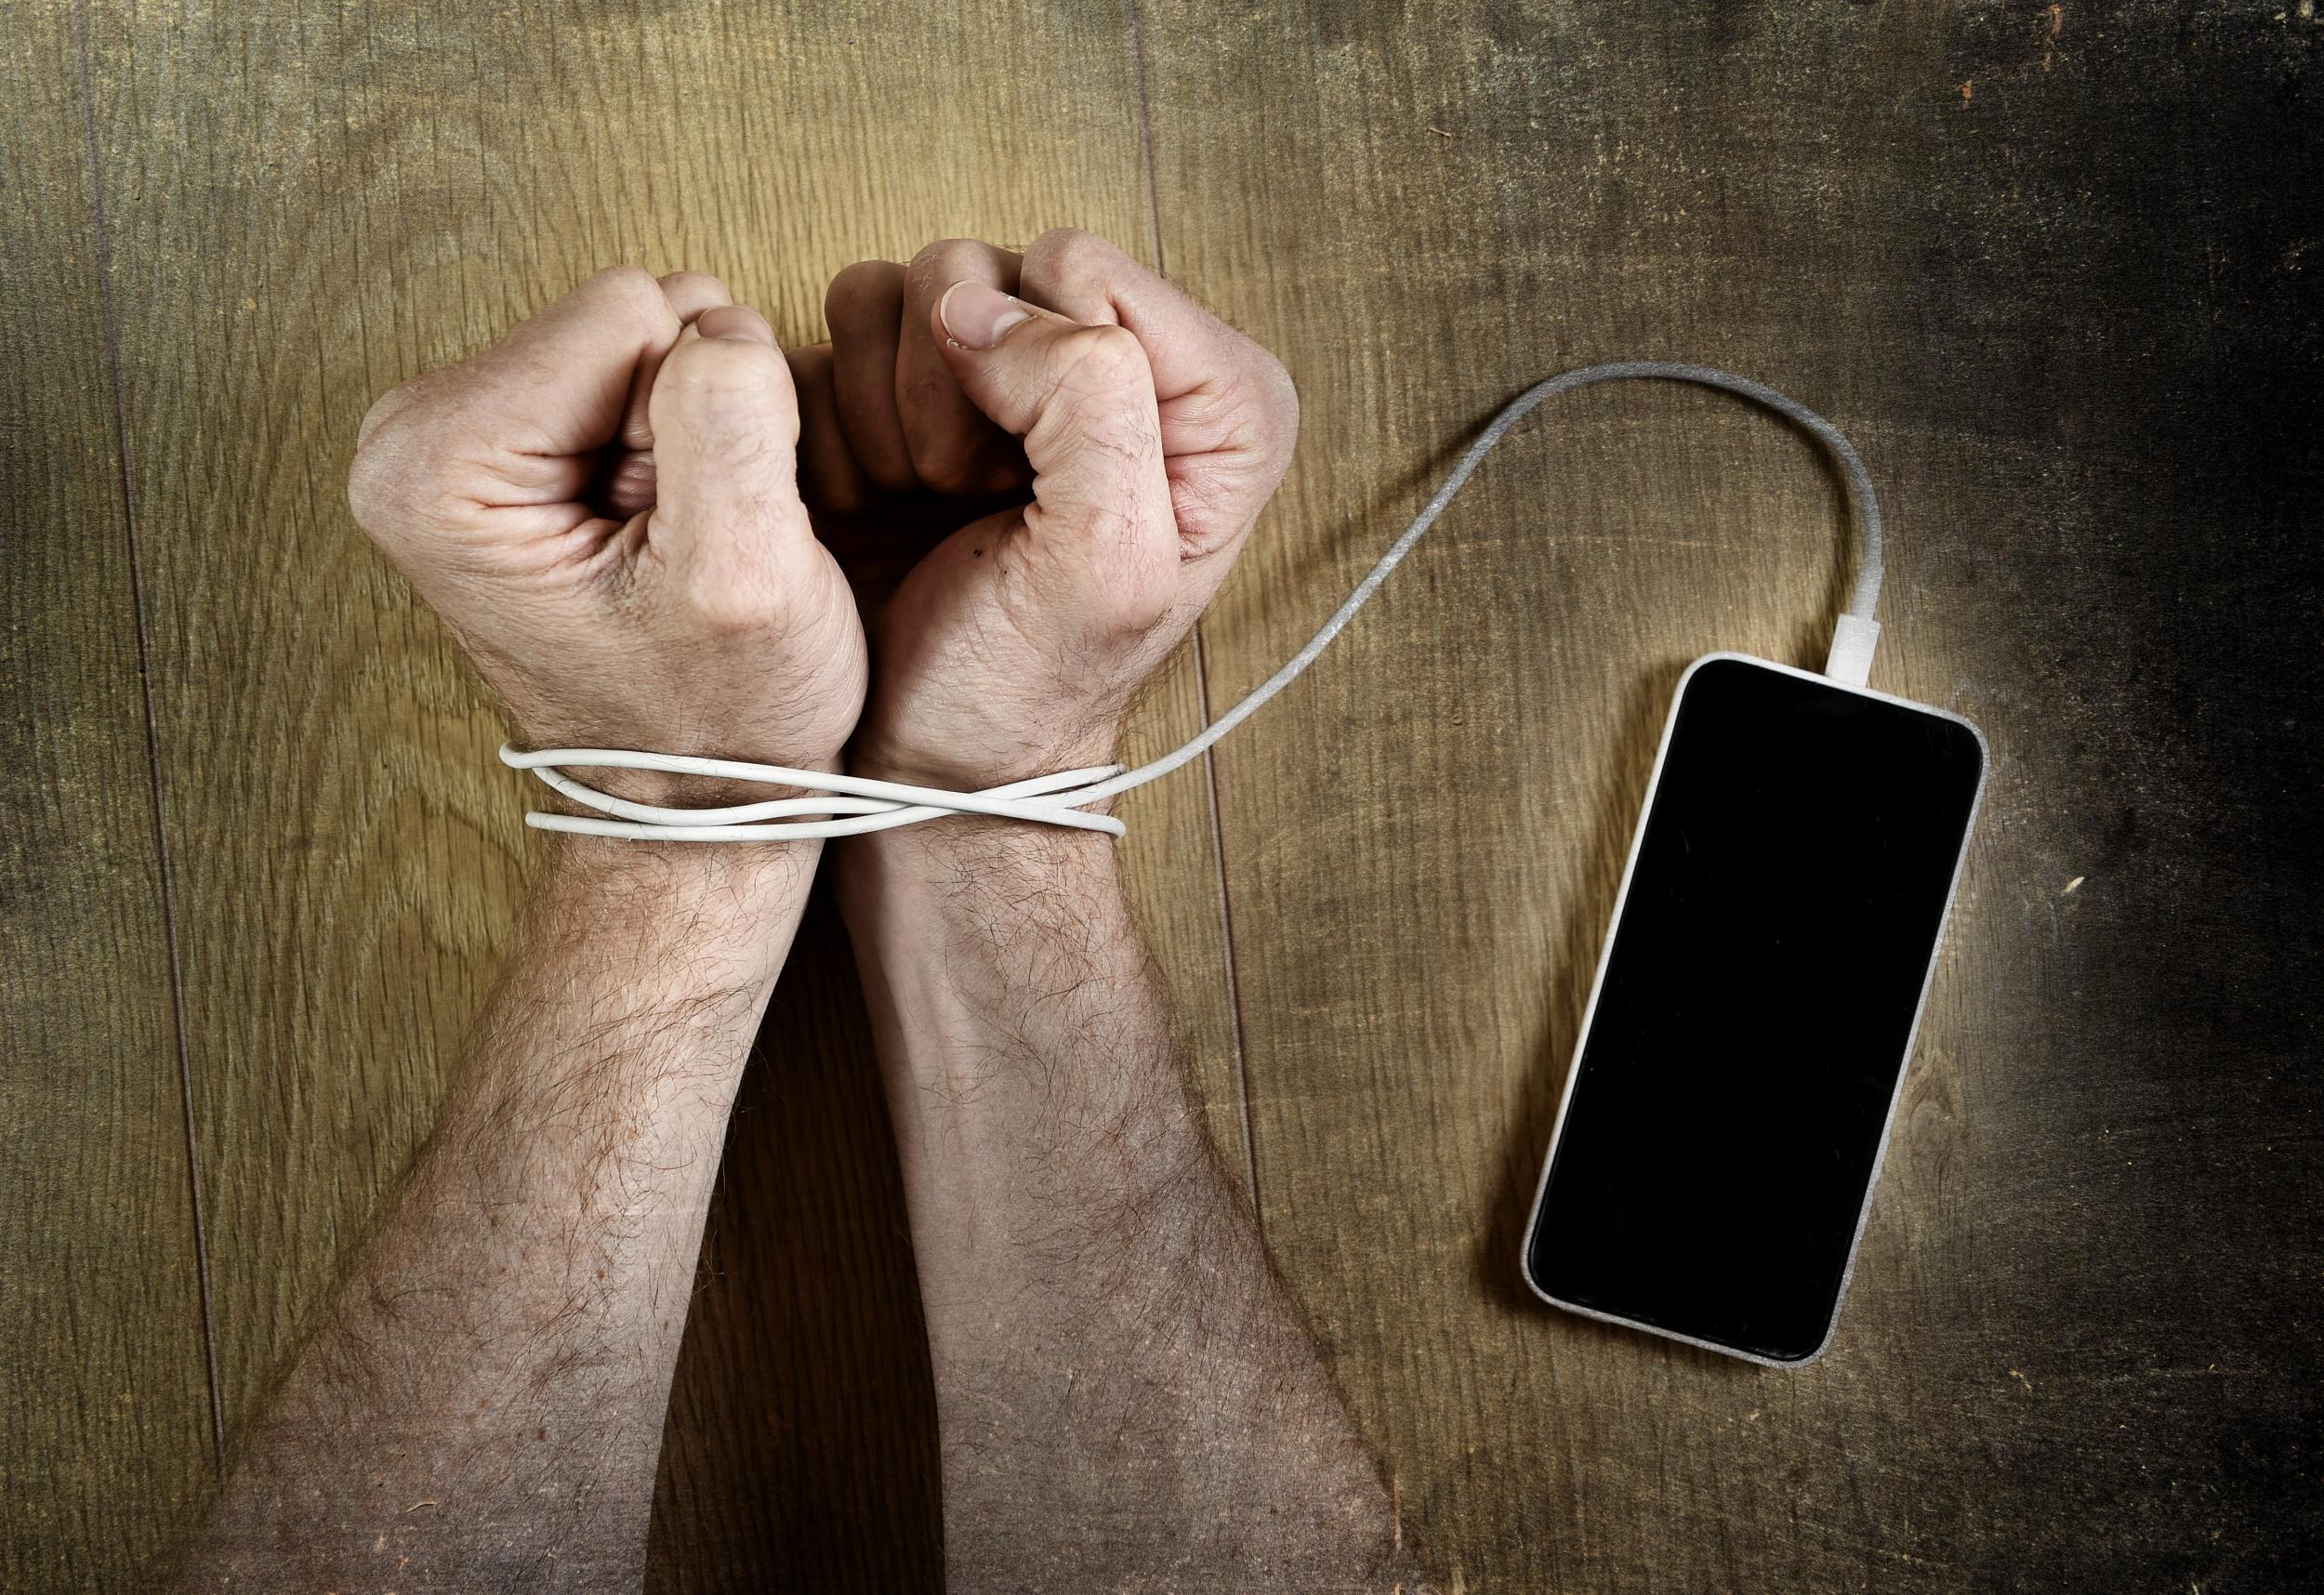 Following these five steps will help you take your life back from phone addiction